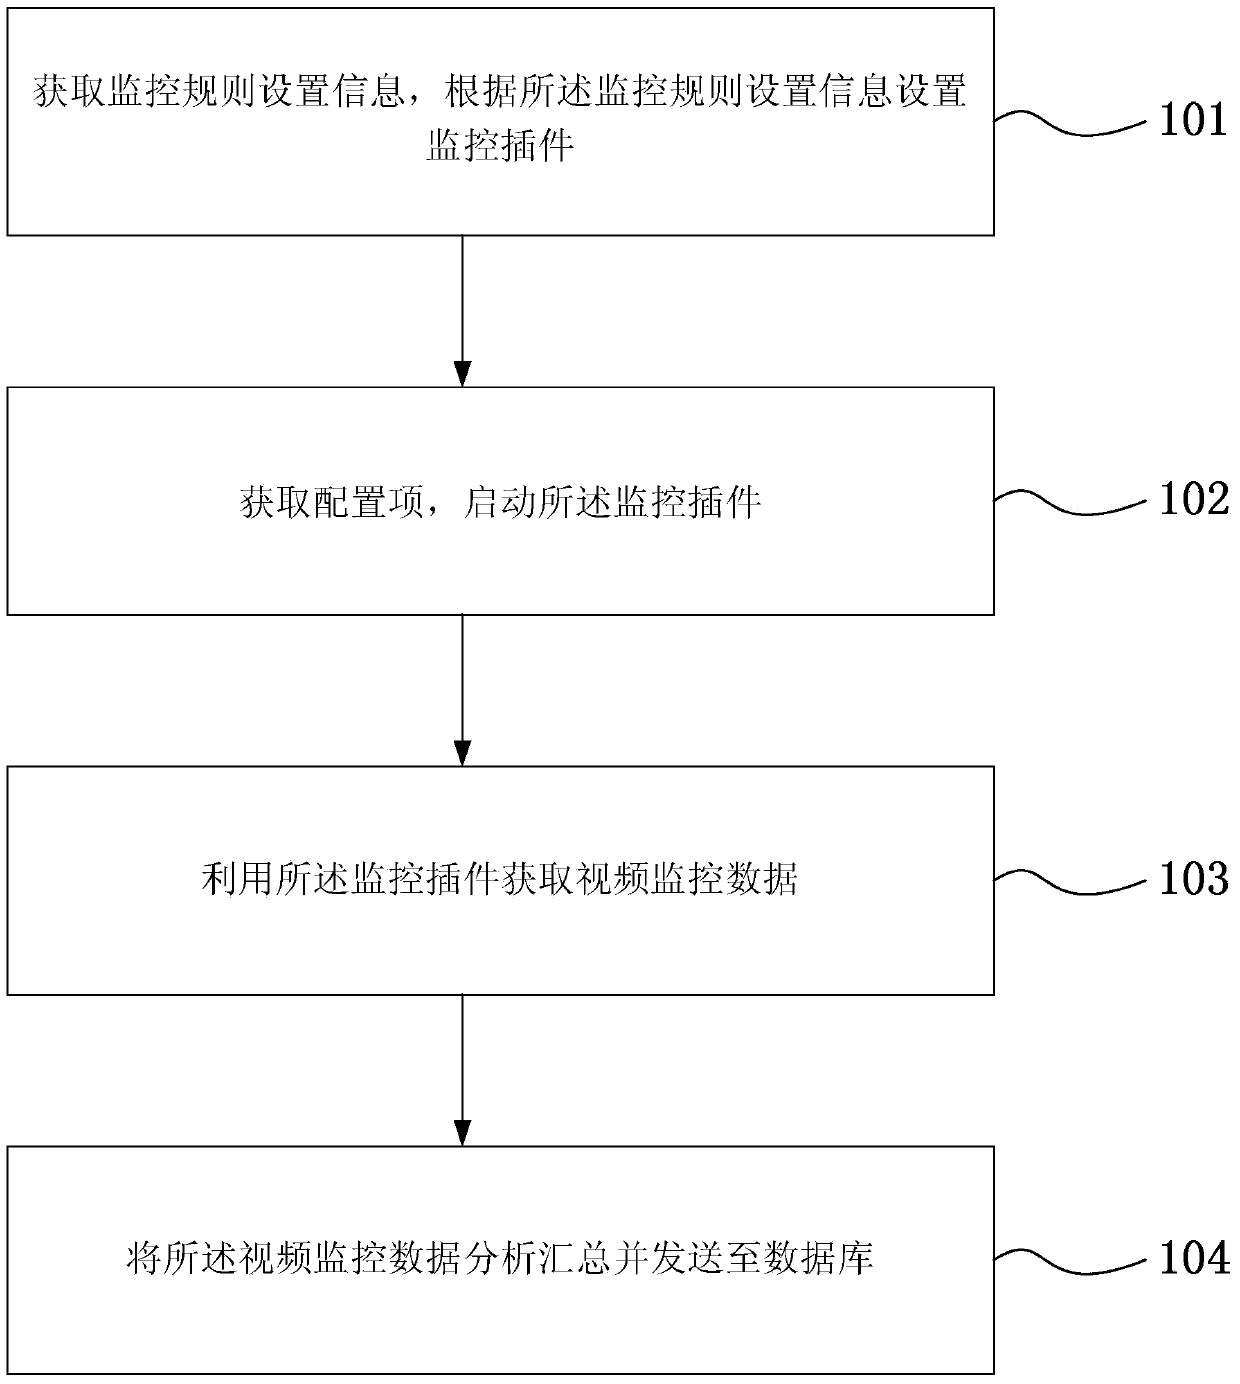 Video data monitoring method and system